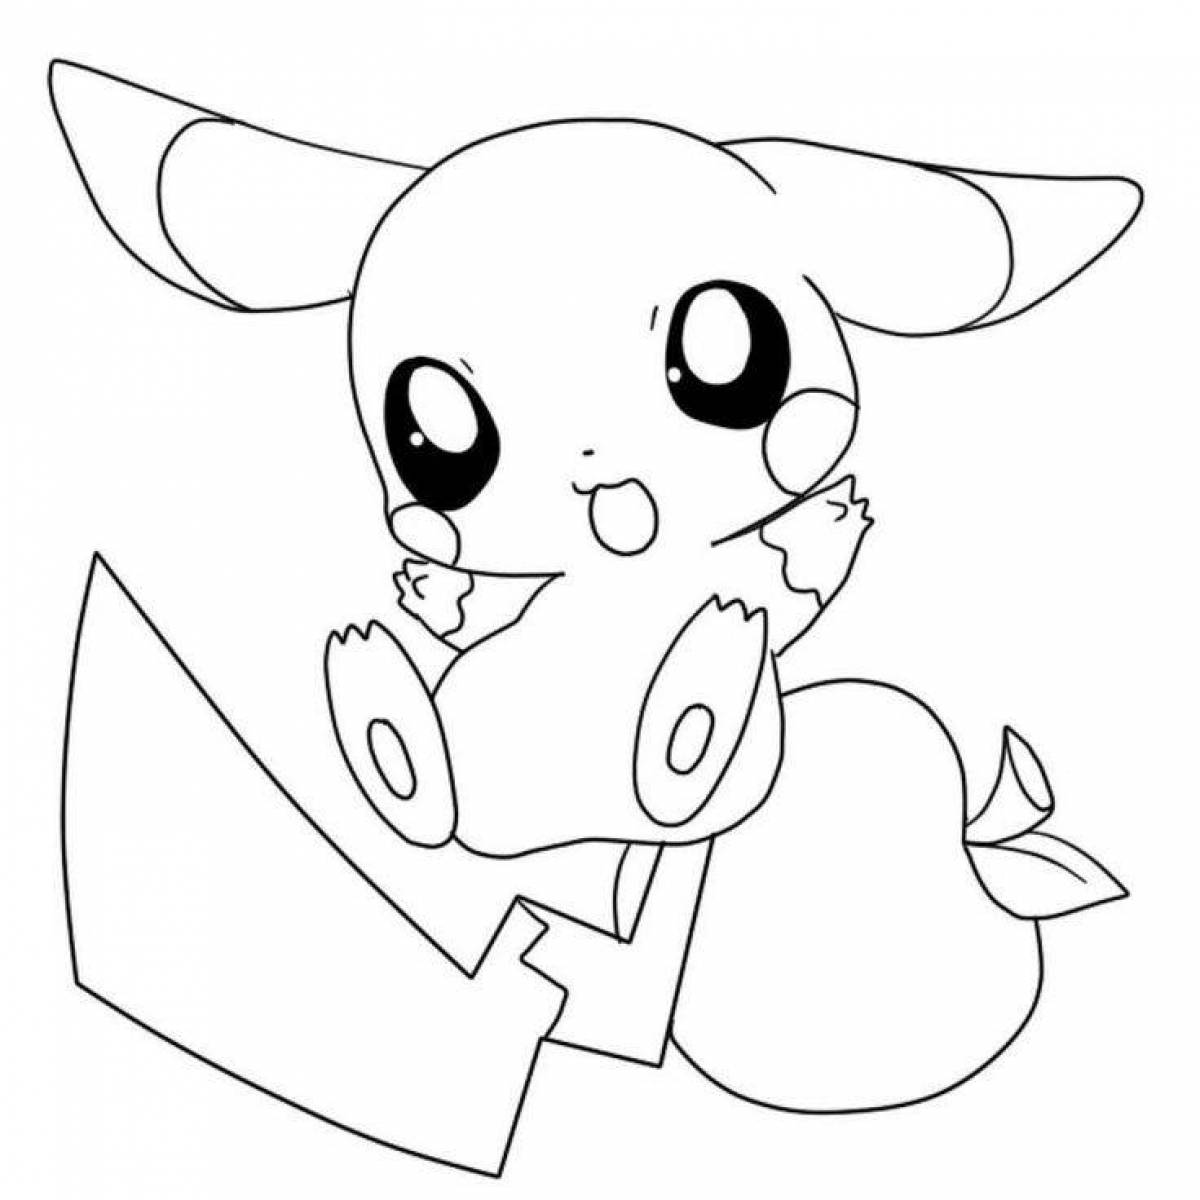 Cute pikachu coloring page for kids